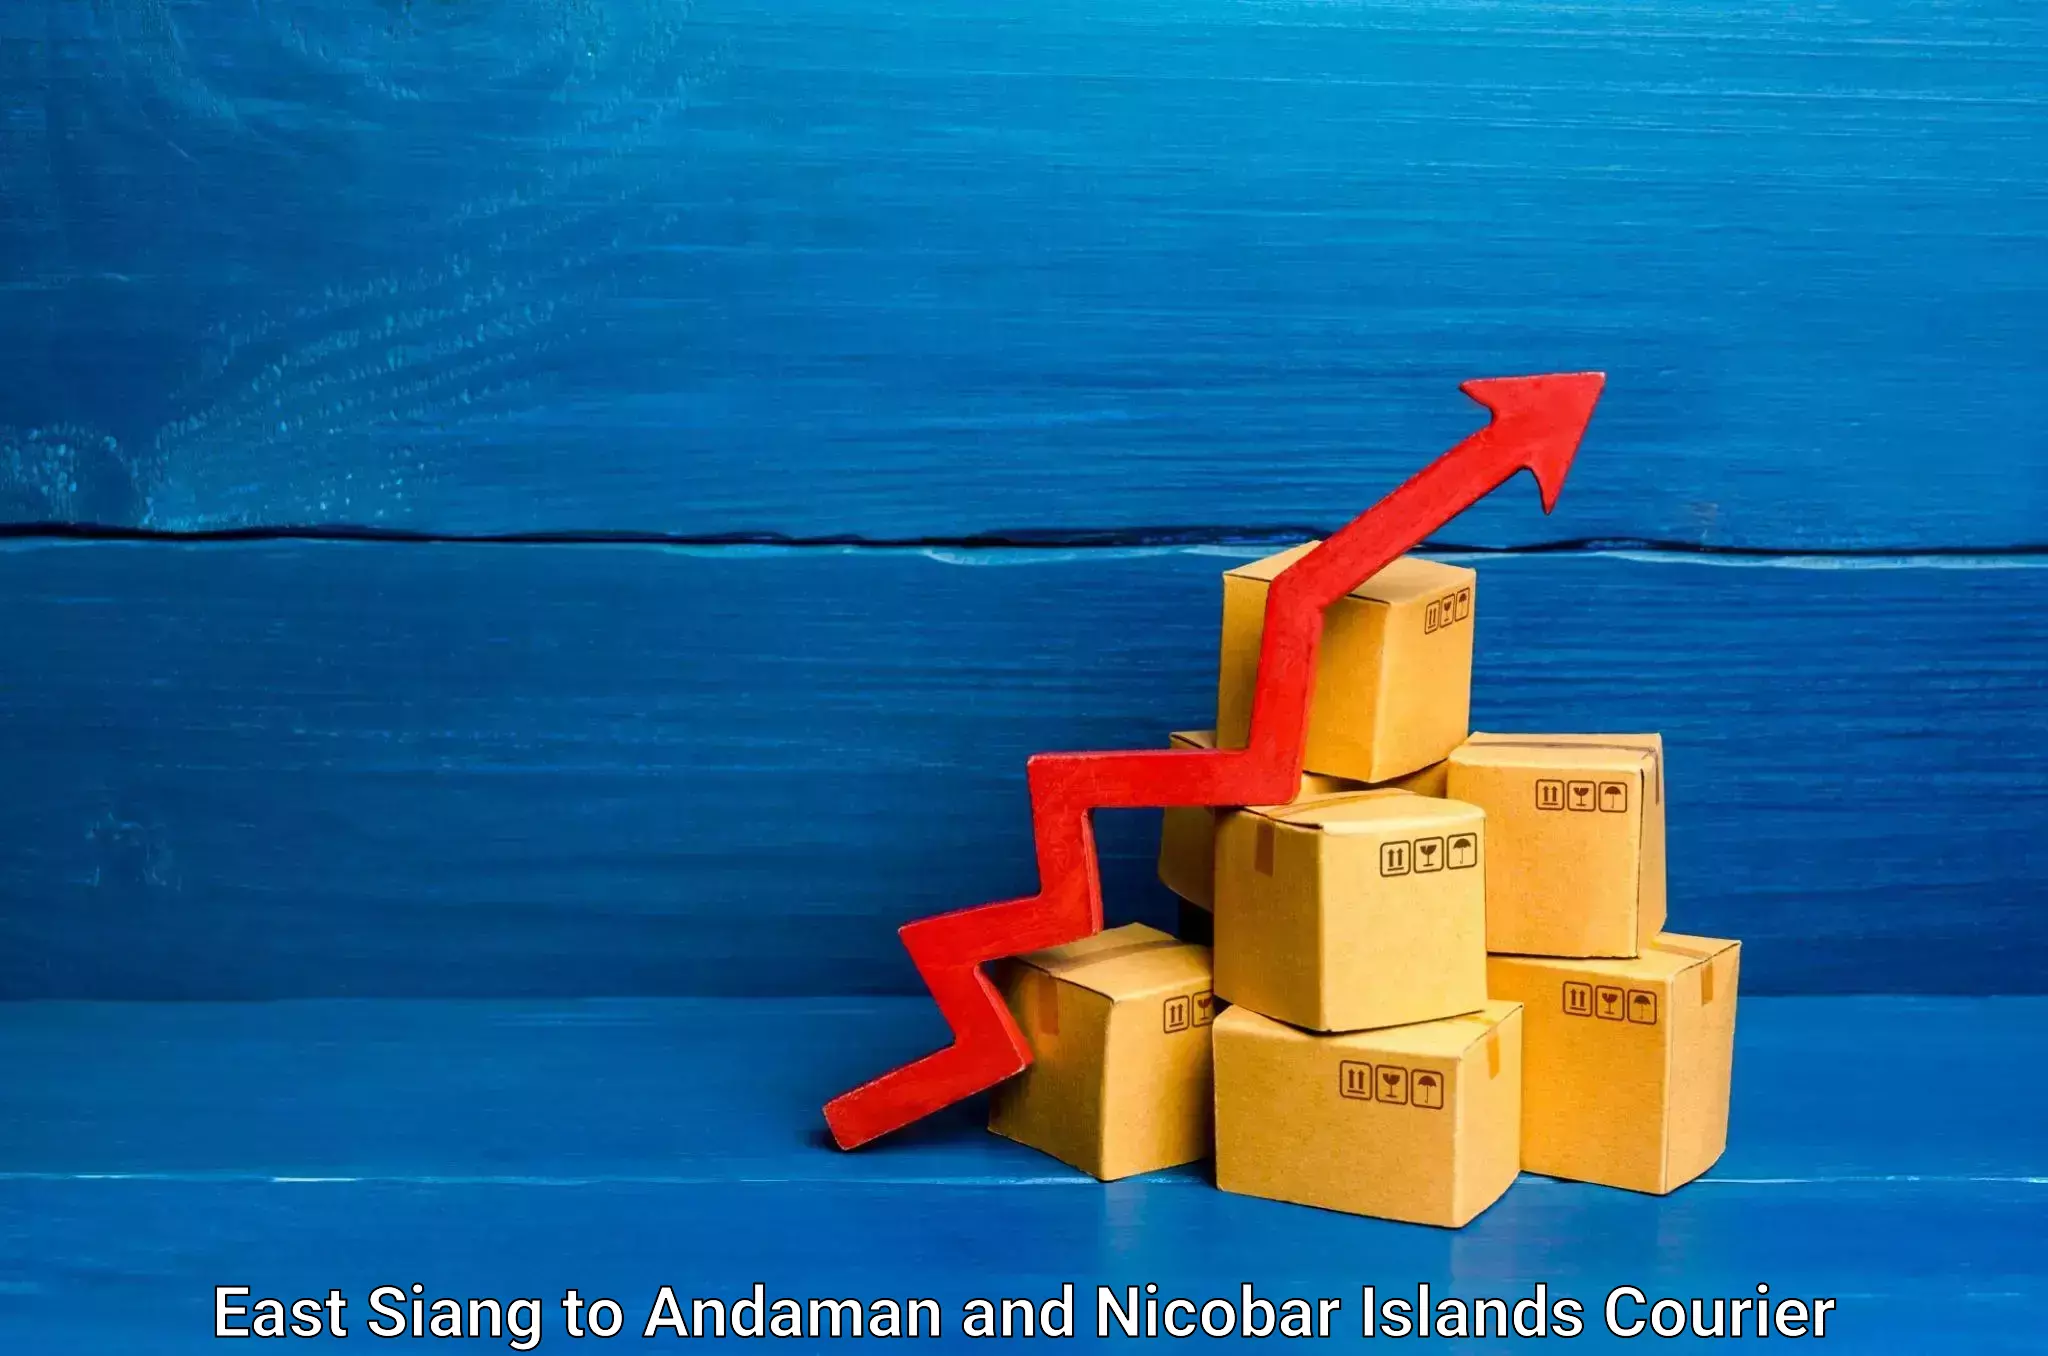 Efficient order fulfillment in East Siang to Andaman and Nicobar Islands